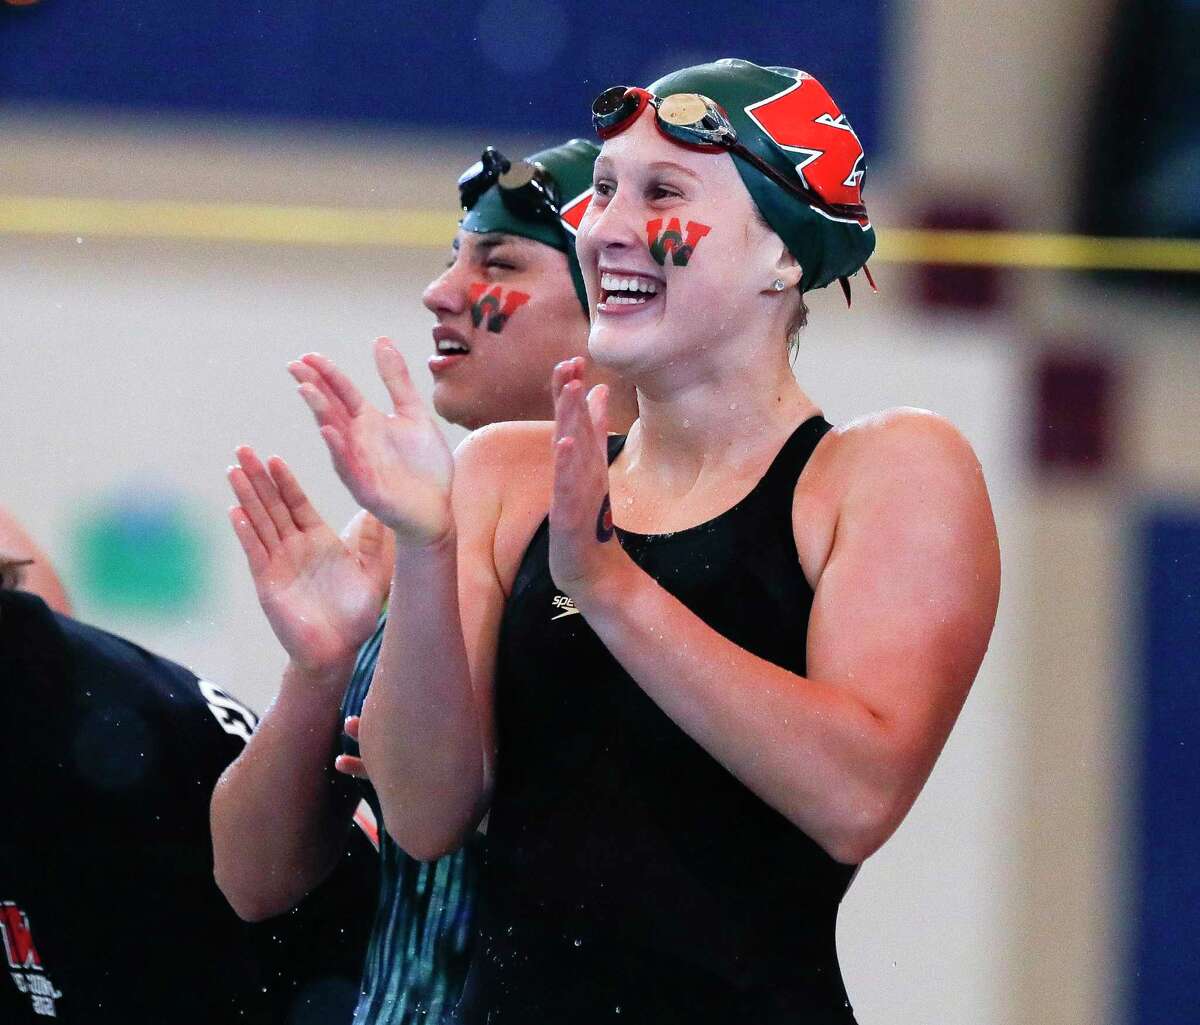 The Woodlands swimmers react after winning the girls 200-yard medley relay during the Region IV-6A Swimming & Diving Championships at the Conroe ISD Natatorium, Friday, Feb. 5, 2020, in Shenandoah.